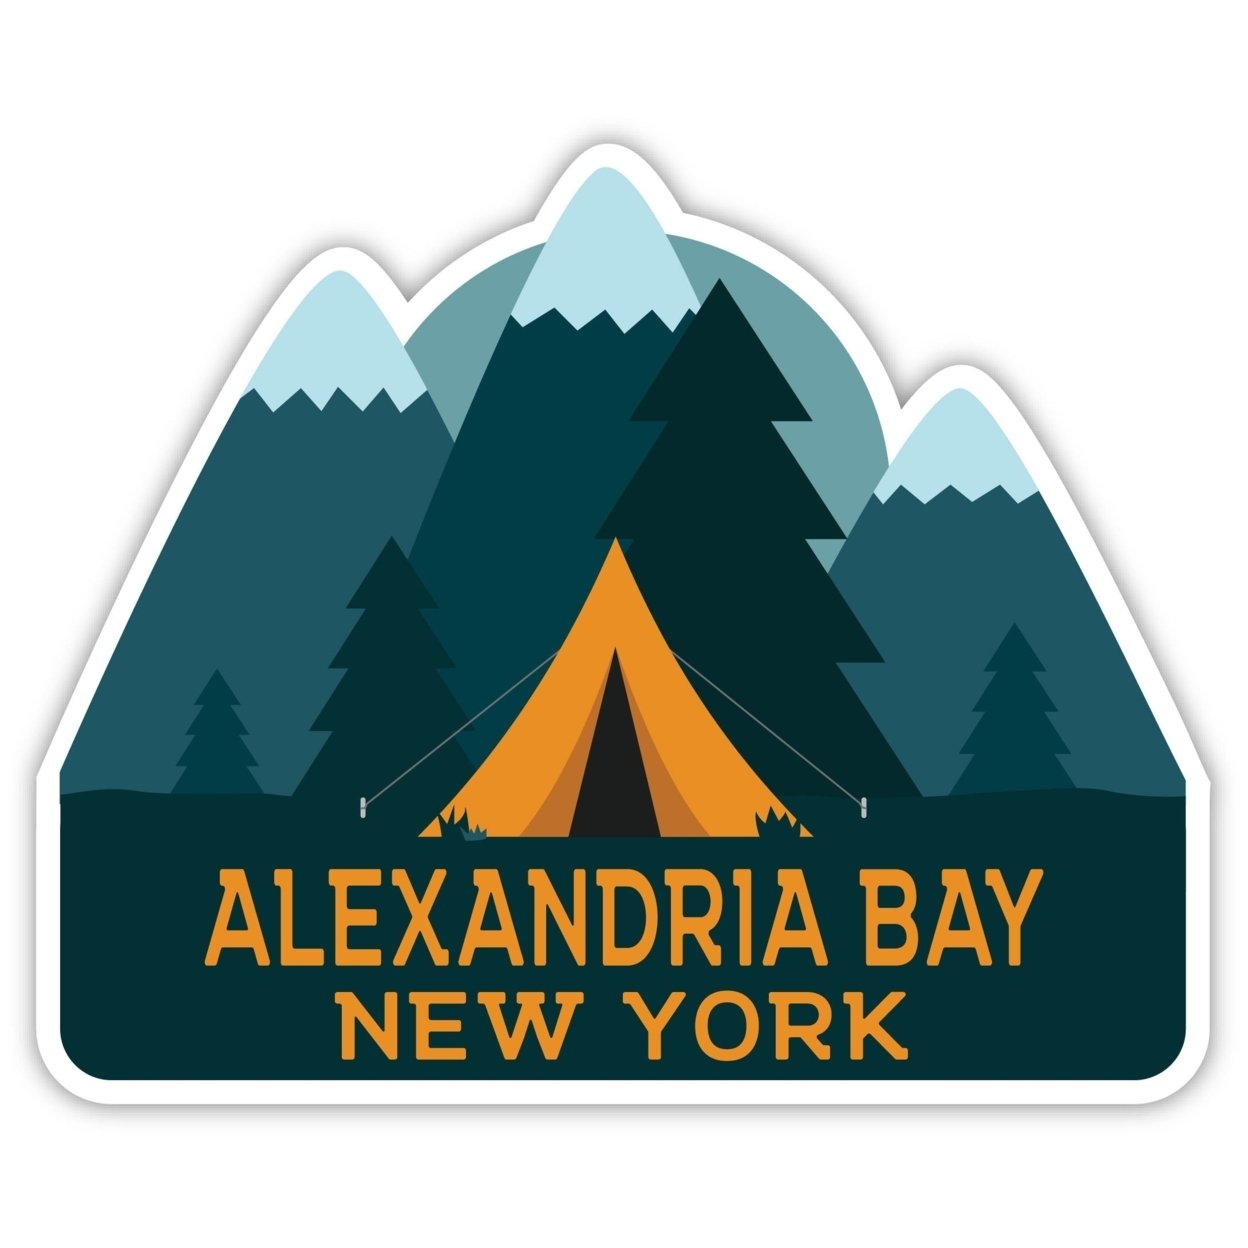 Alexandria Bay New York Souvenir Decorative Stickers (Choose Theme And Size) - 4-Pack, 2-Inch, Tent